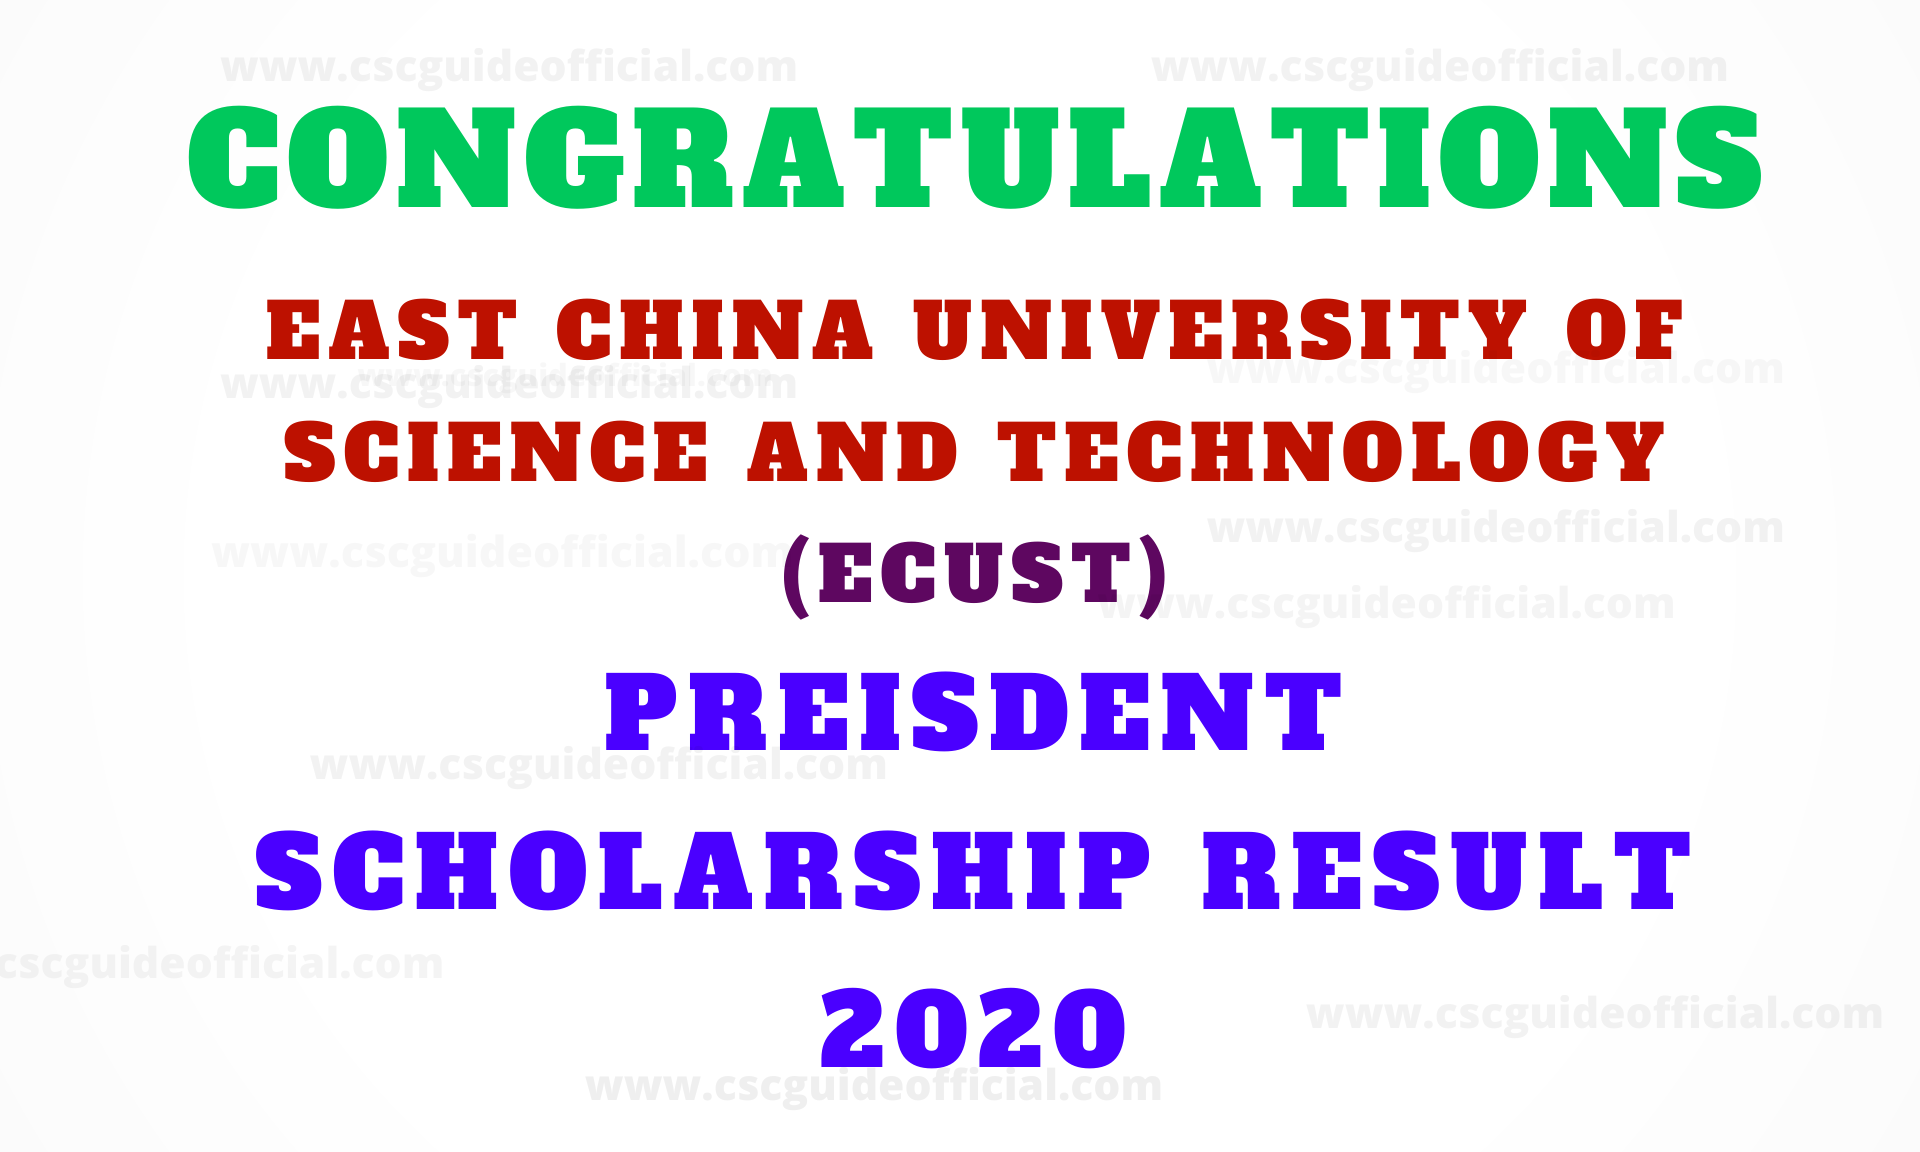 east china university of science and technology president scholarship result 2020